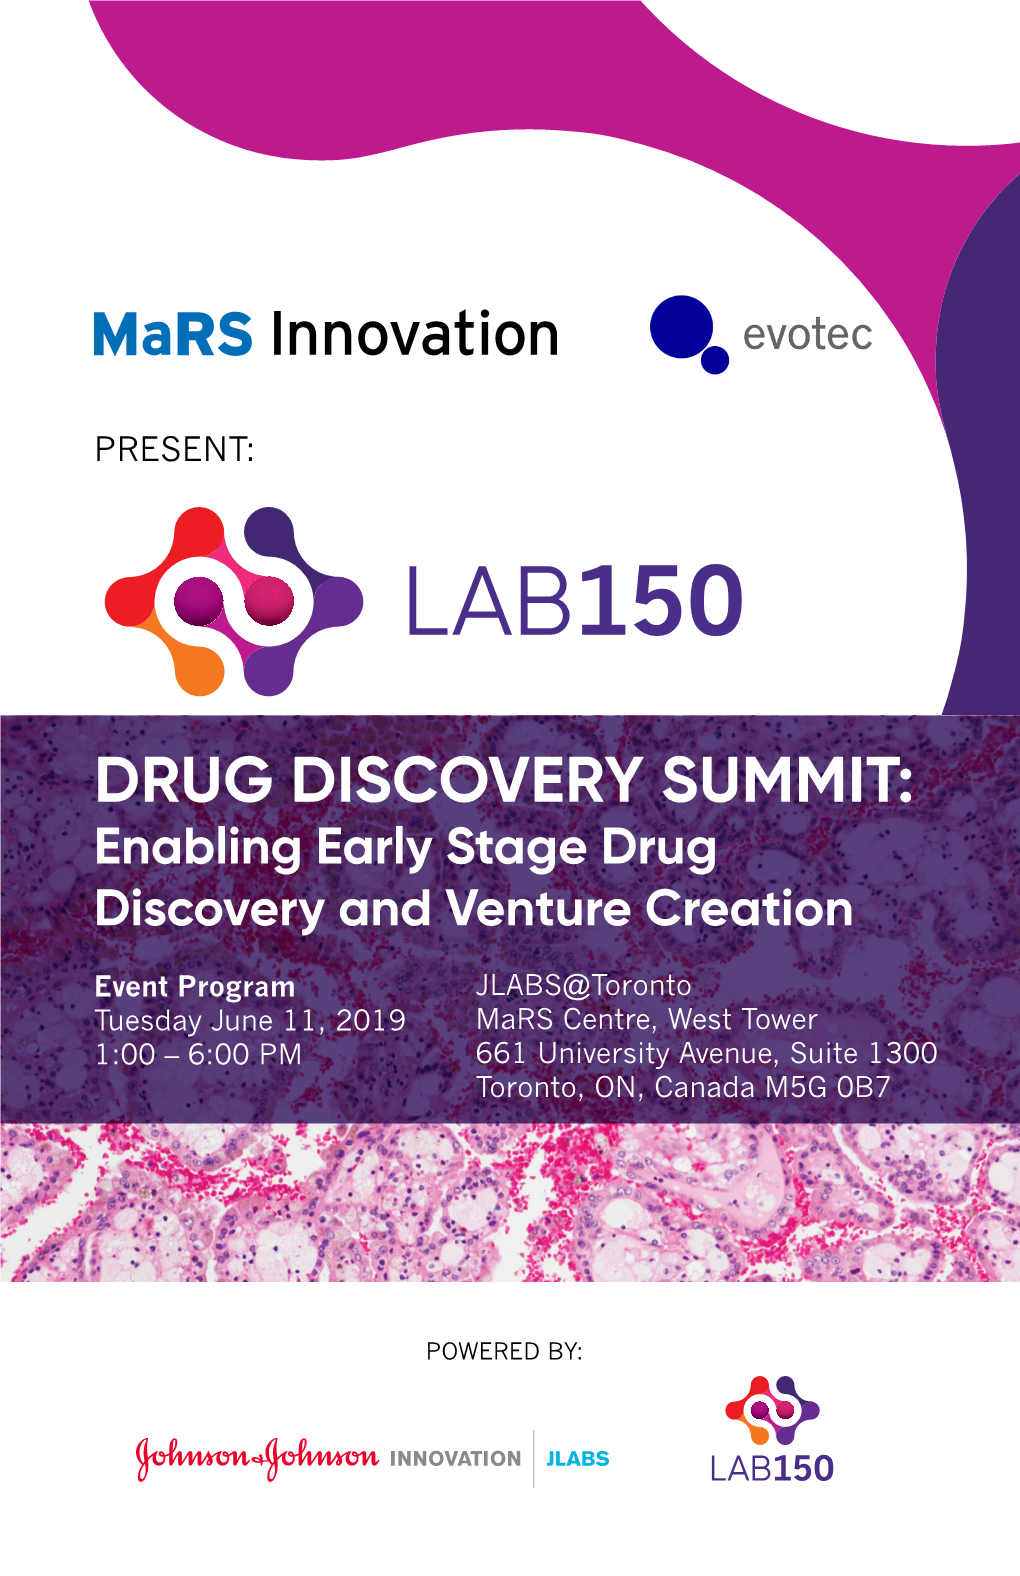 DRUG DISCOVERY SUMMIT: Enabling Early Stage Drug Discovery and Venture Creation